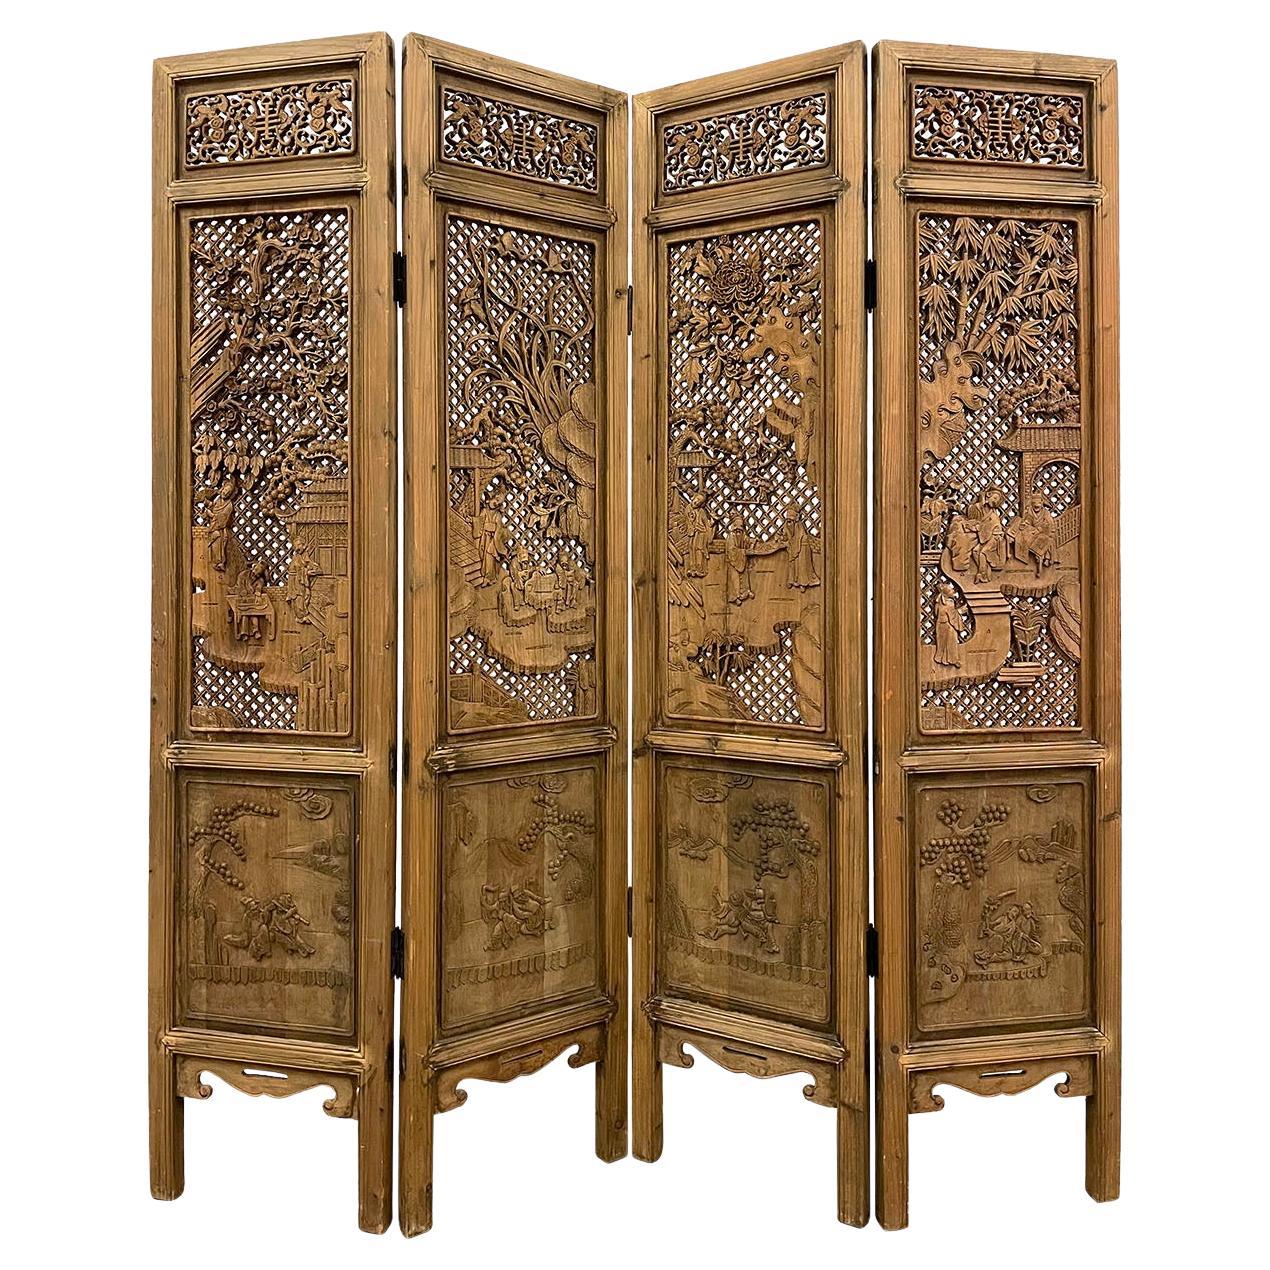 20th Century Chinese Handcrafted 4 Panels Camphor Wood Screen/Room Divider